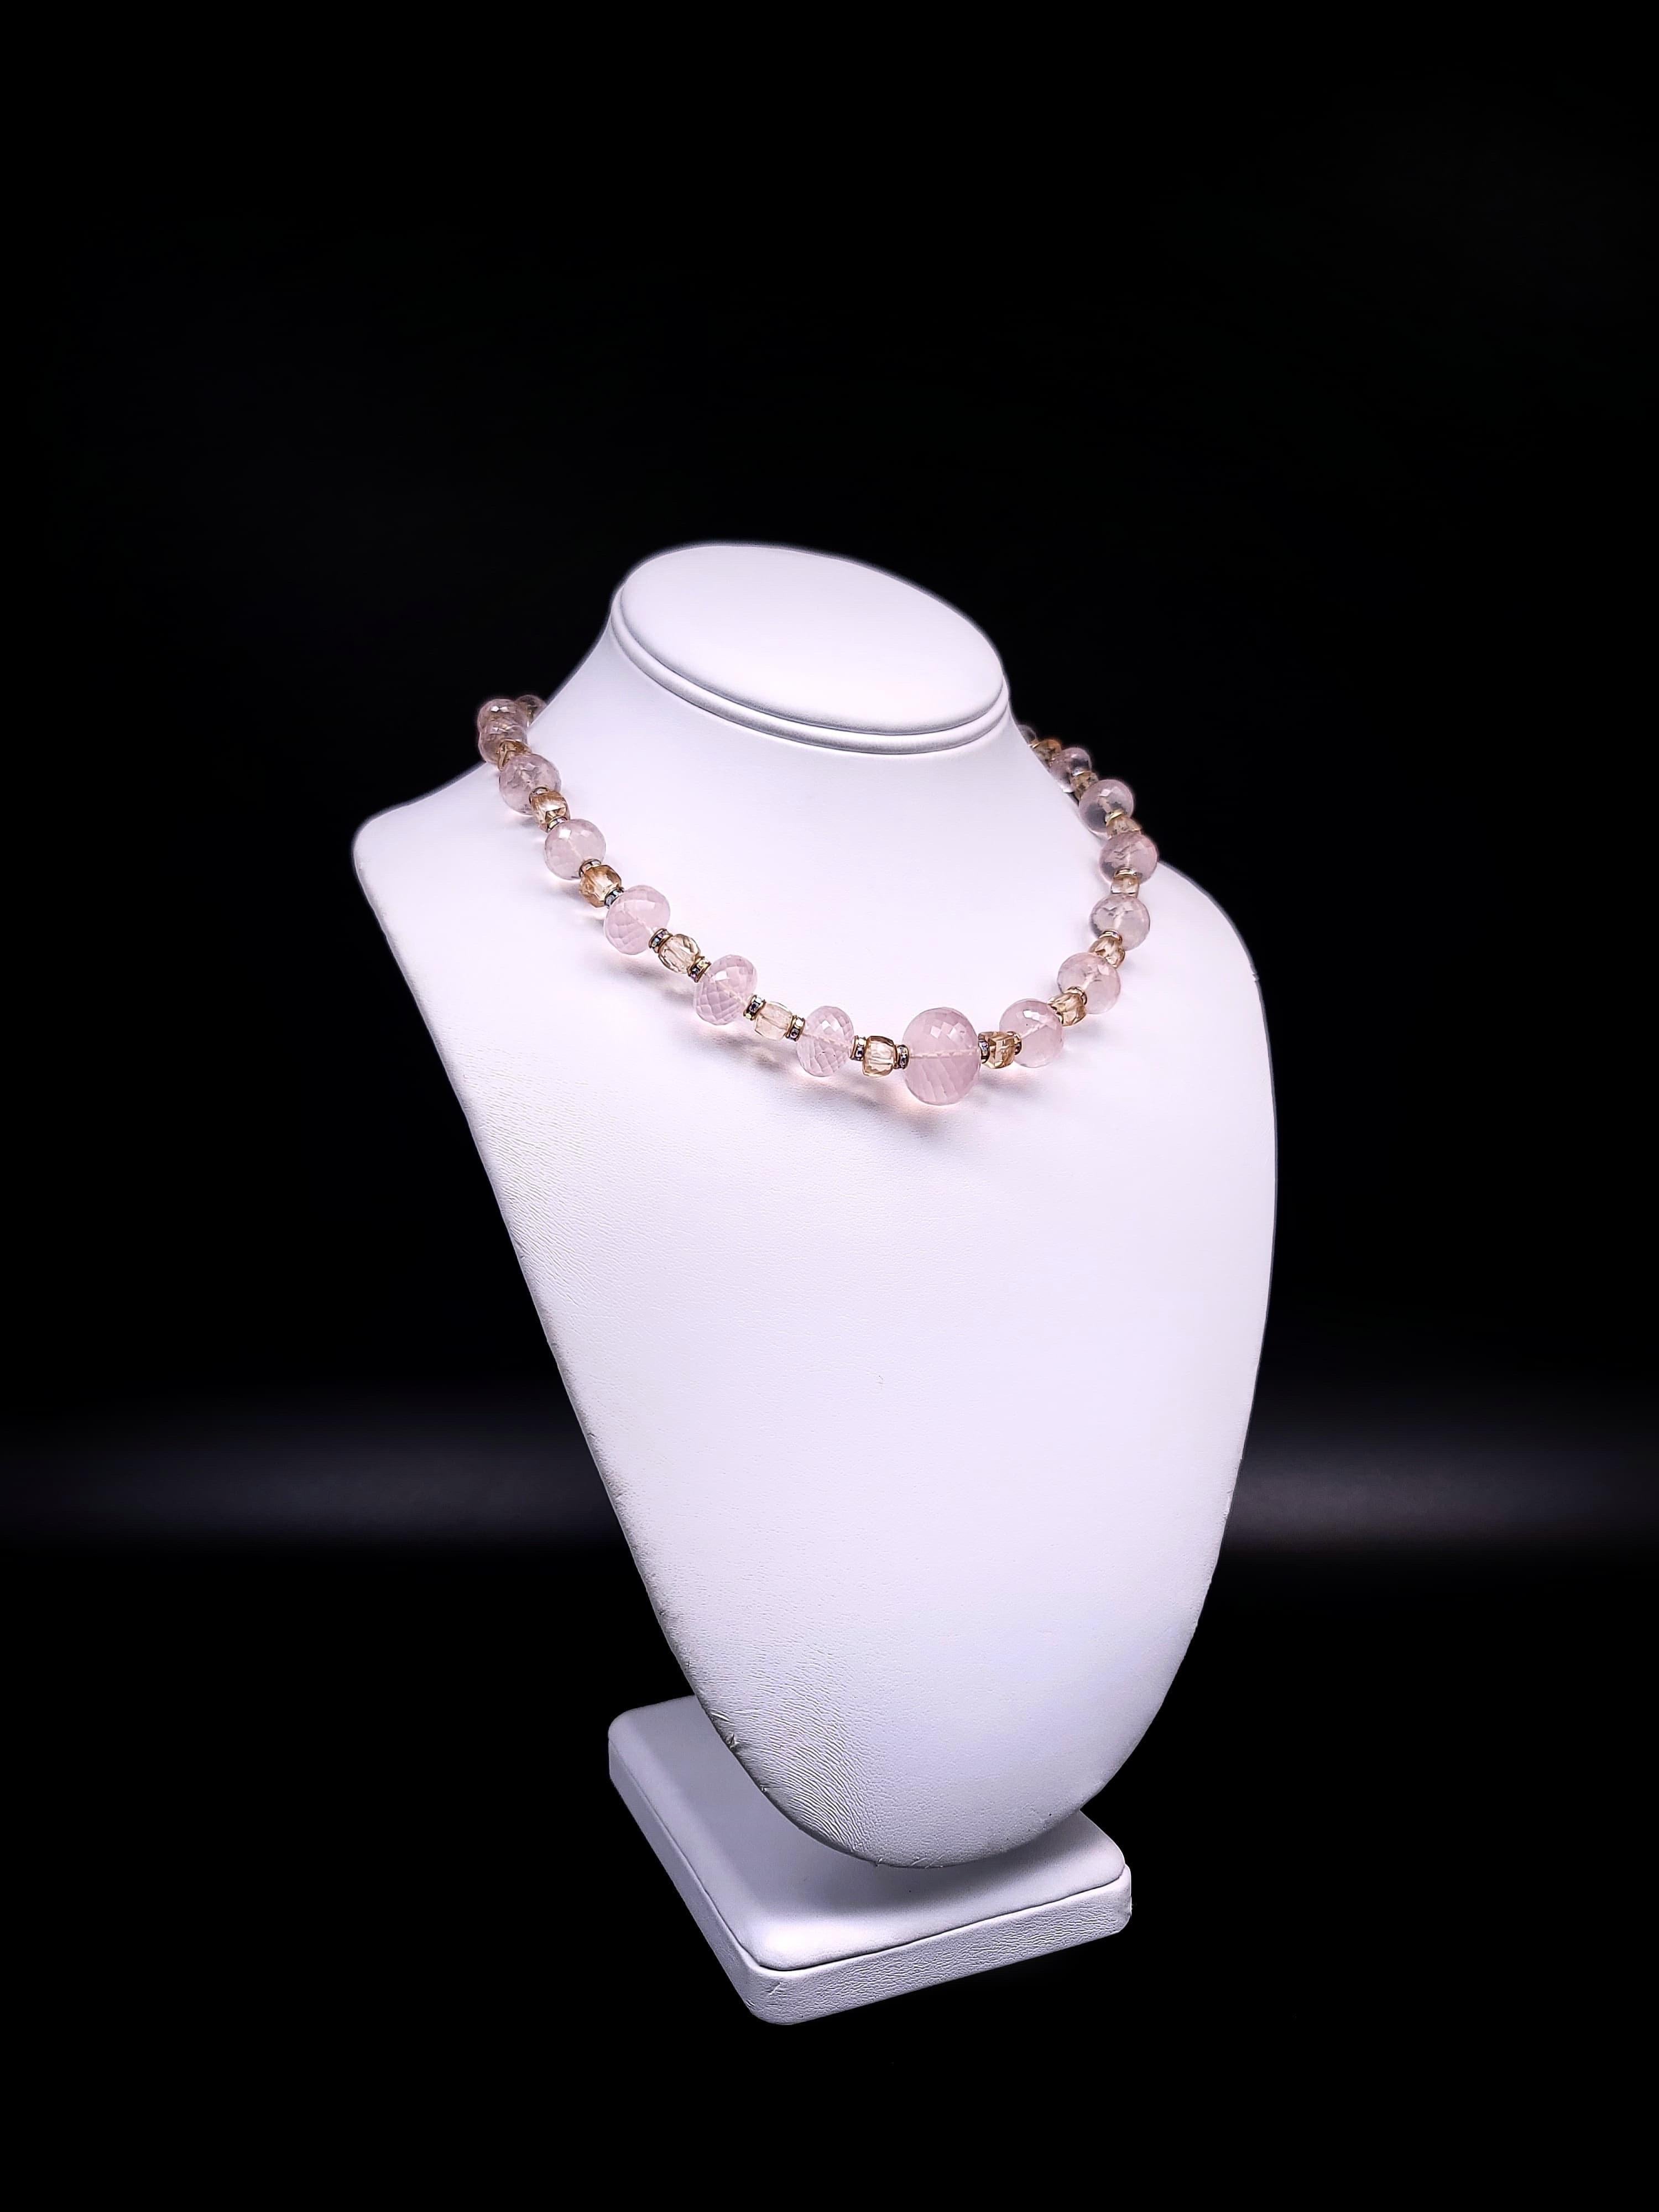 Step into a world of enchantment with this truly unique creation, a masterpiece as singular as your own dreams. Delicately crafted, it whispers of romance akin to a midsummer night's reverie. Each bead, a testament to elegance, showcases the gentle